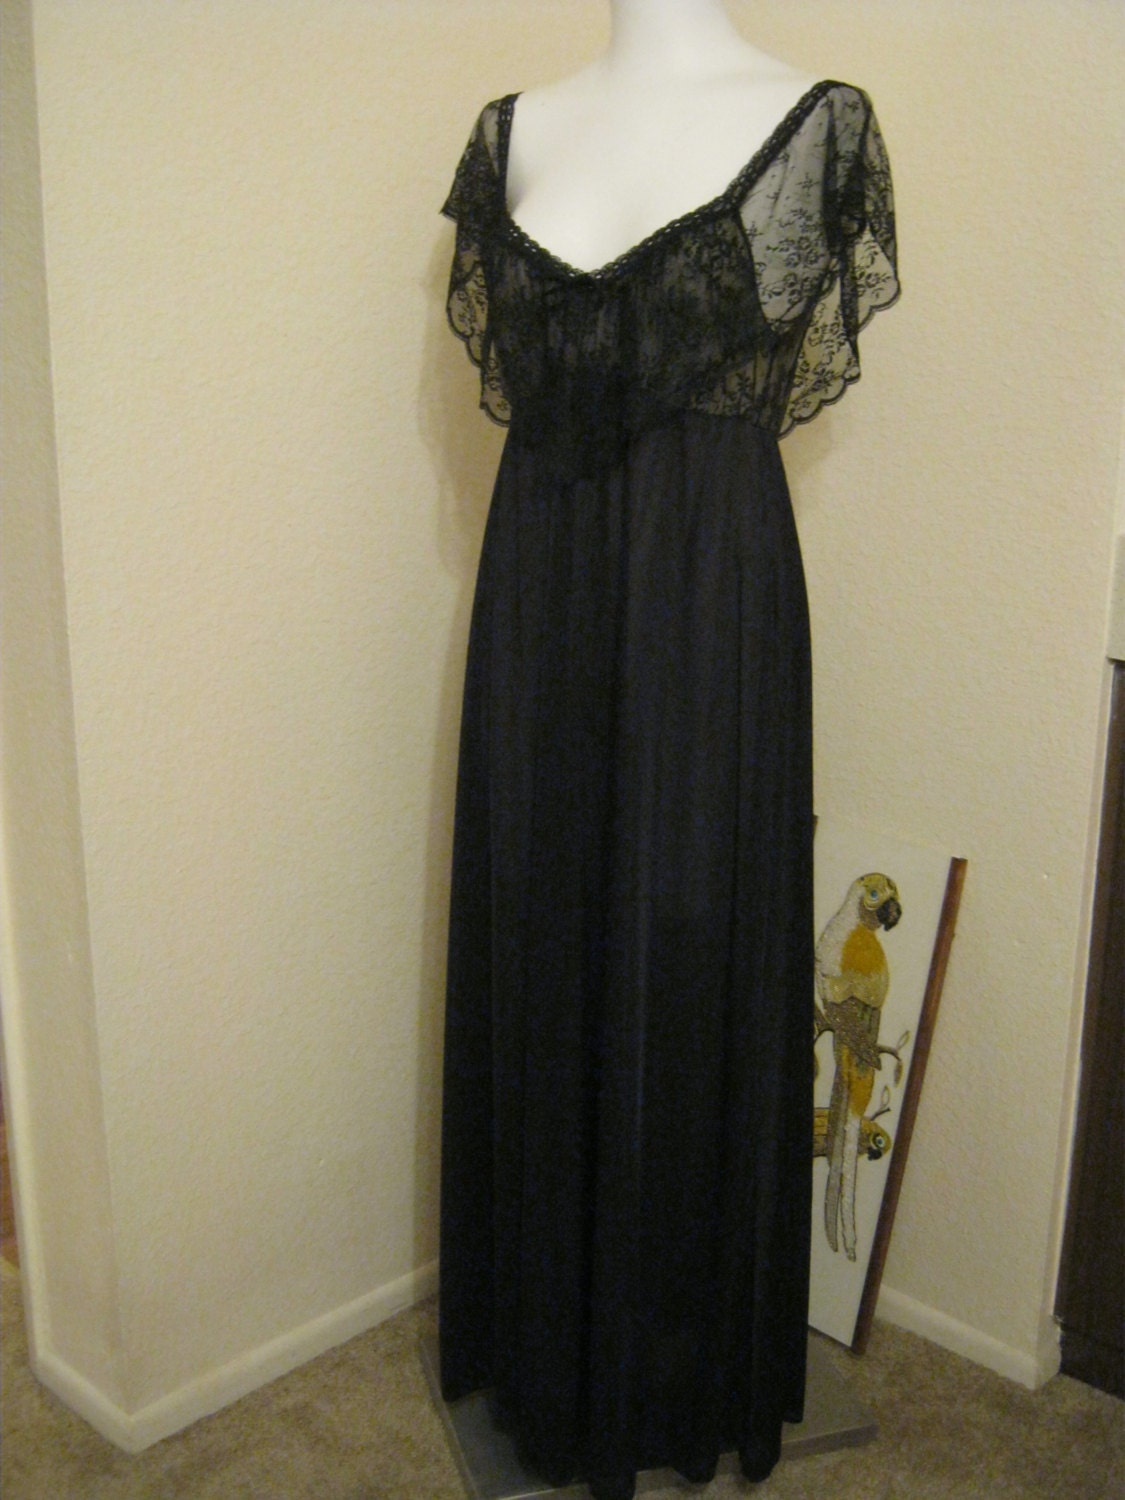 Vintage 70s sexy romantic black lace long nightgown. by lovinglola